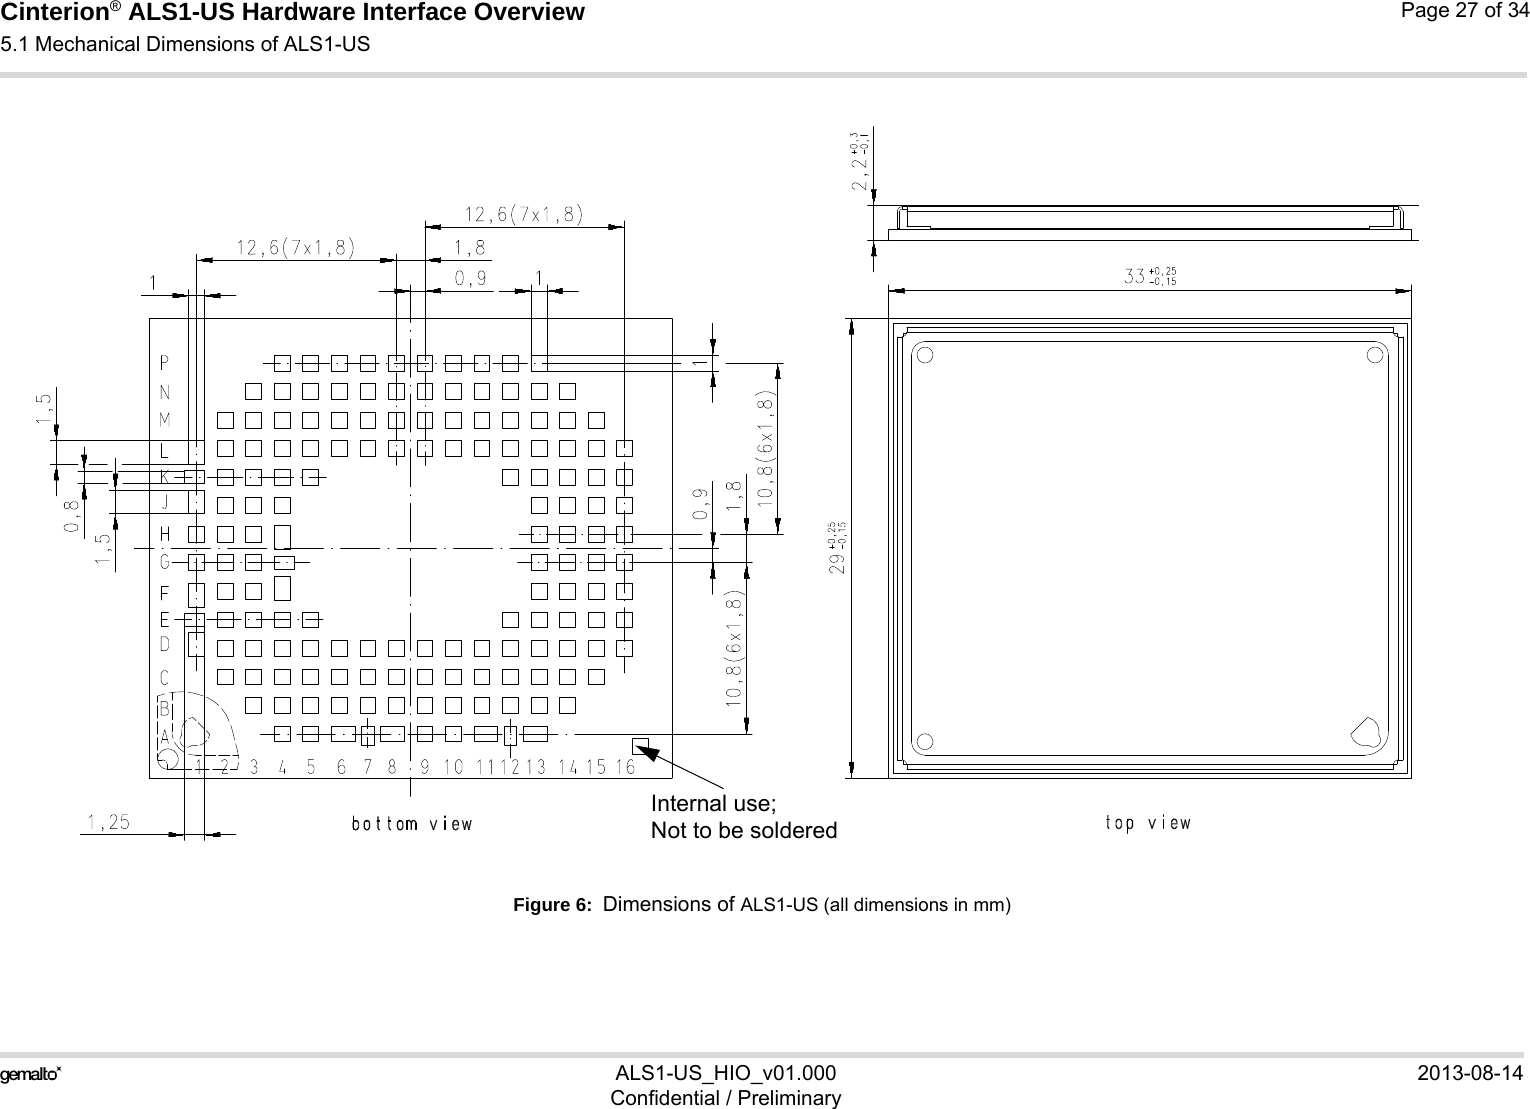 Cinterion® ALS1-US Hardware Interface Overview5.1 Mechanical Dimensions of ALS1-US27ALS1-US_HIO_v01.000 2013-08-14Confidential / PreliminaryPage 27 of 34Figure 6:  Dimensions of ALS1-US (all dimensions in mm)Internal use; Not to be soldered